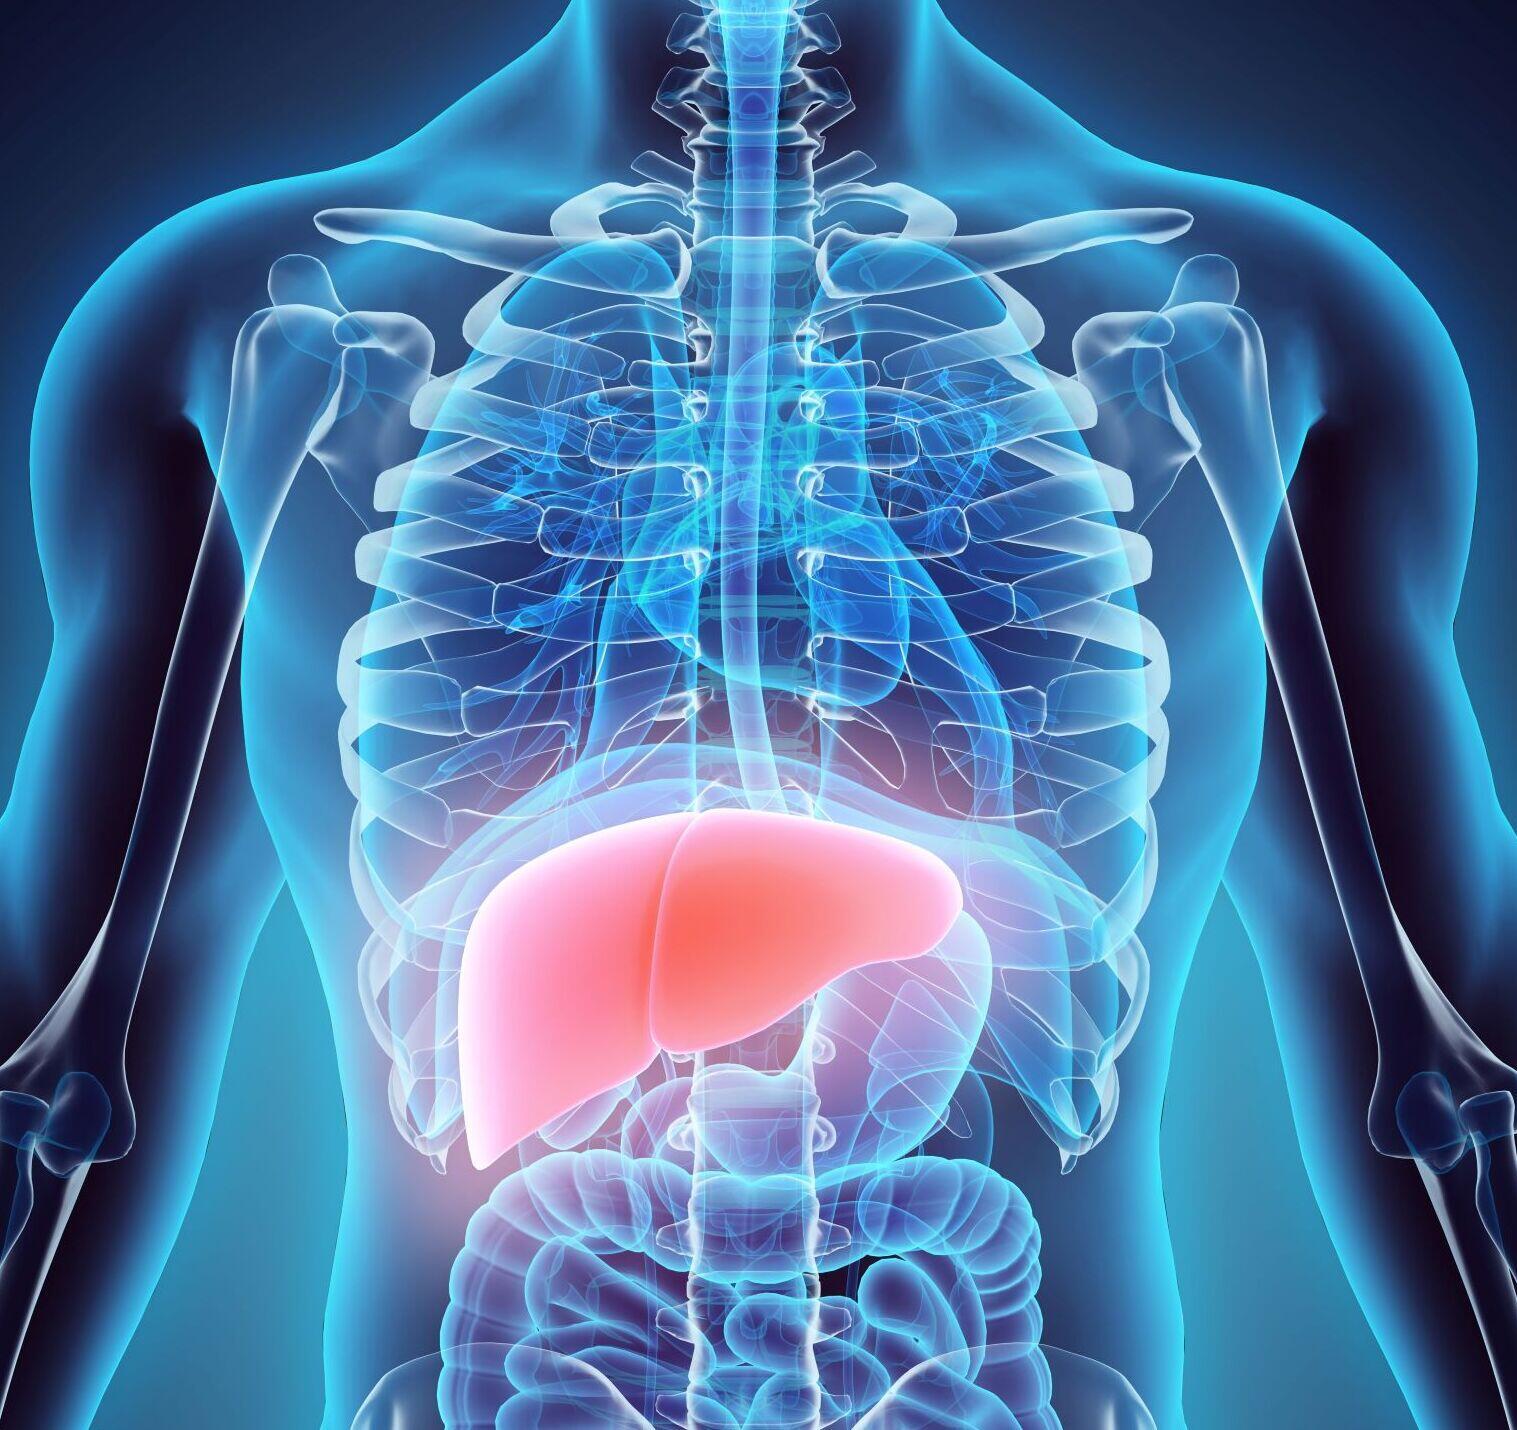 A depiction of a liver's place in the human body.